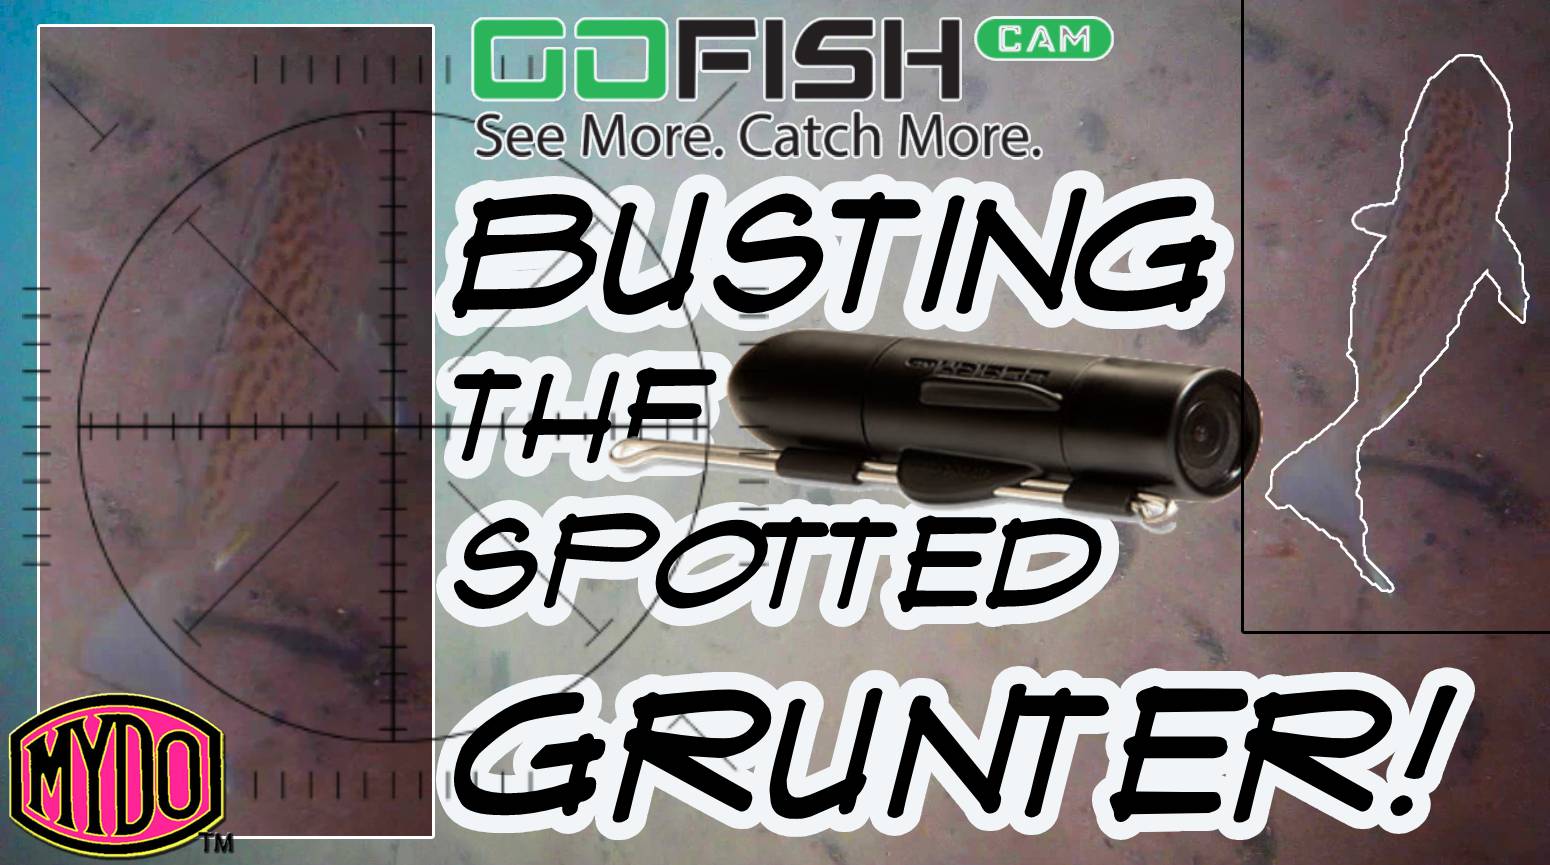 Busting the Spotted Grunter